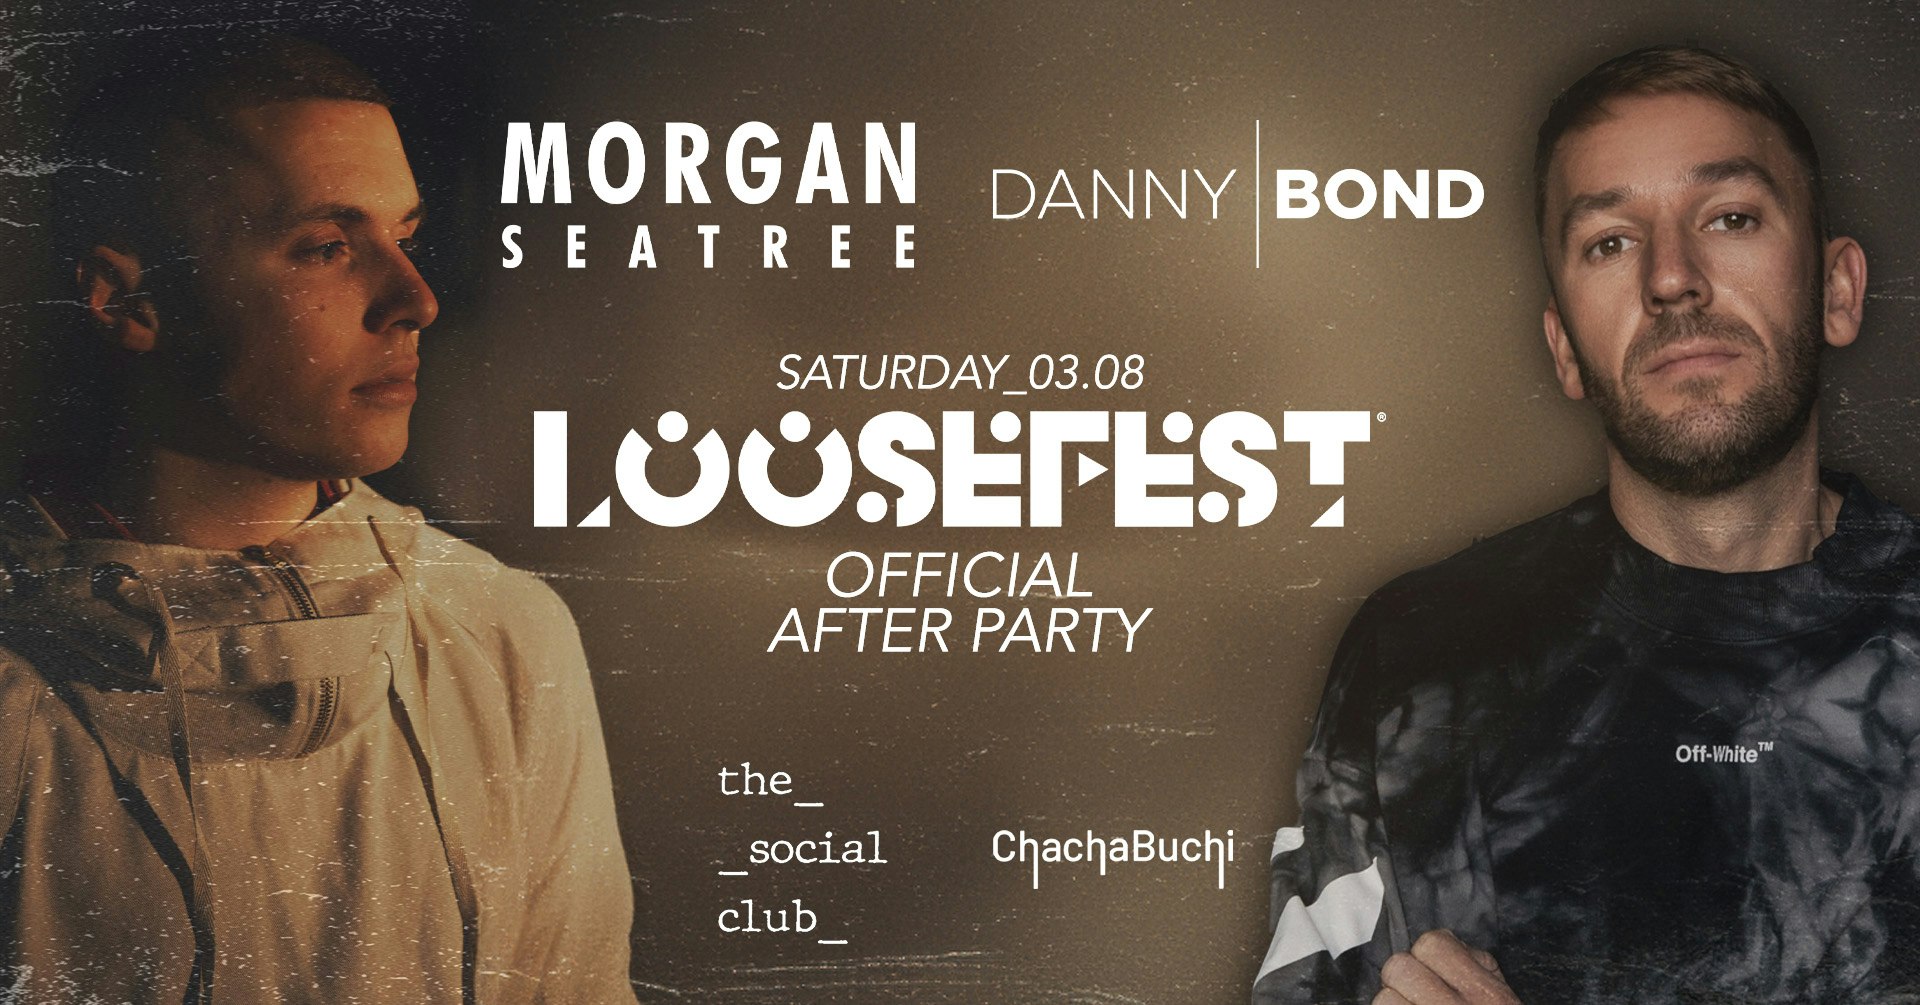 🪩🌴OFFICIAL LOOSEFEST AFTERPARTY // MORGAN SEATREE & DANNY BOND // 3 ROOM TAKEOVER 🌴🪩 @ THE SOCIAL CLUB, CHACHABUCHI & HOWLERS!